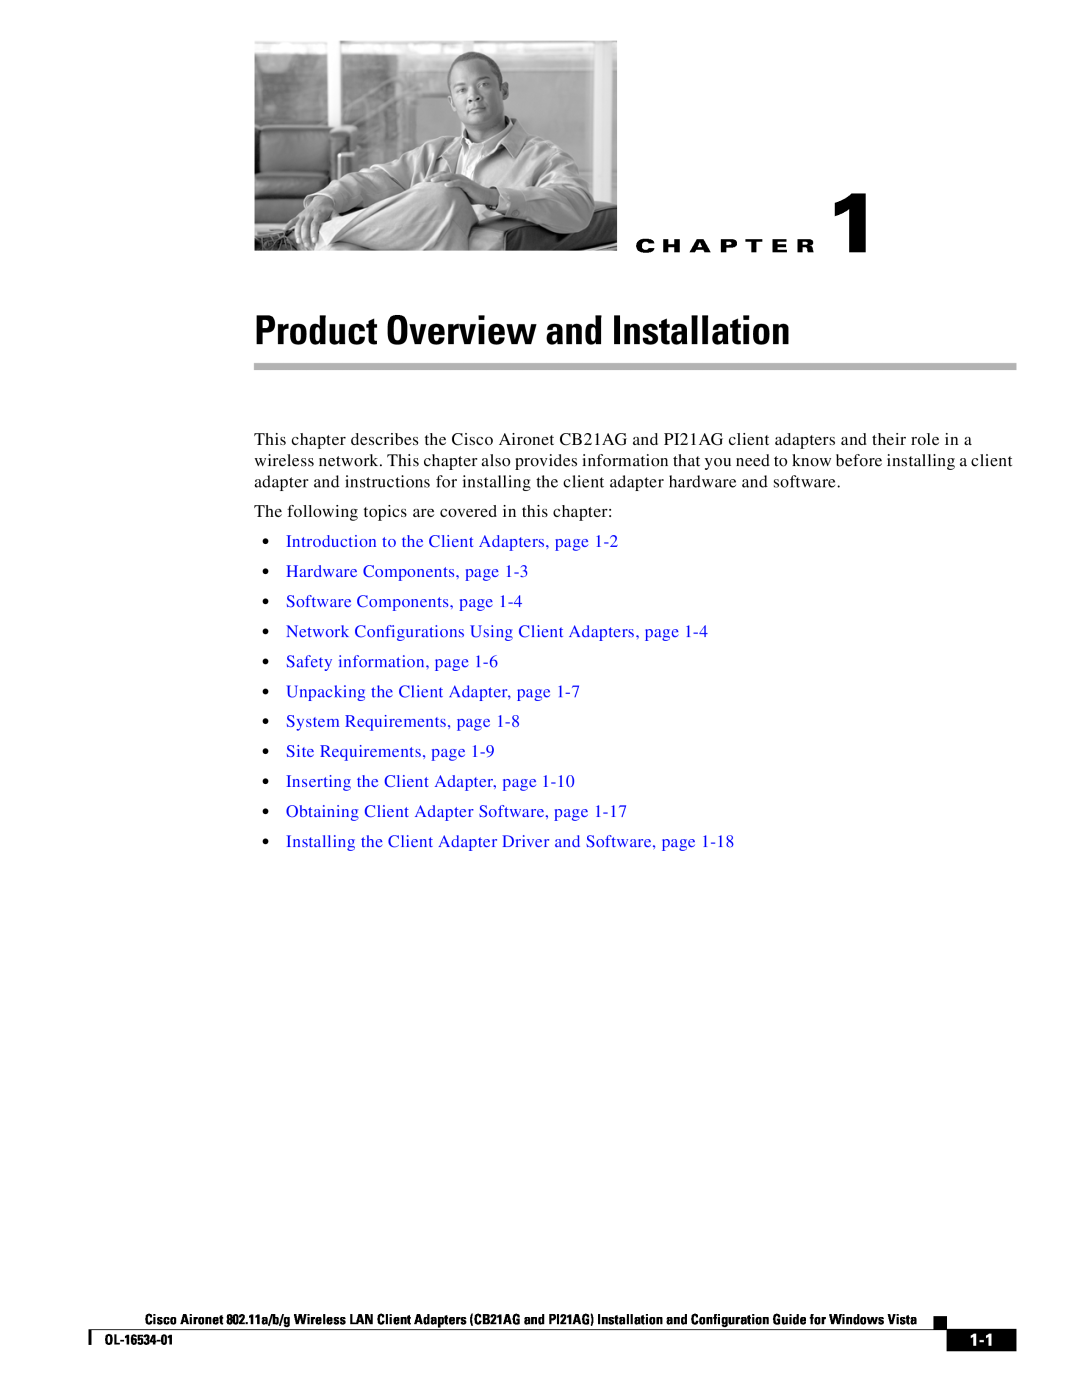 Cisco Systems CB21AG, PI21AG manual Product Overview and Installation, C H A P T E R, Software Components, page 